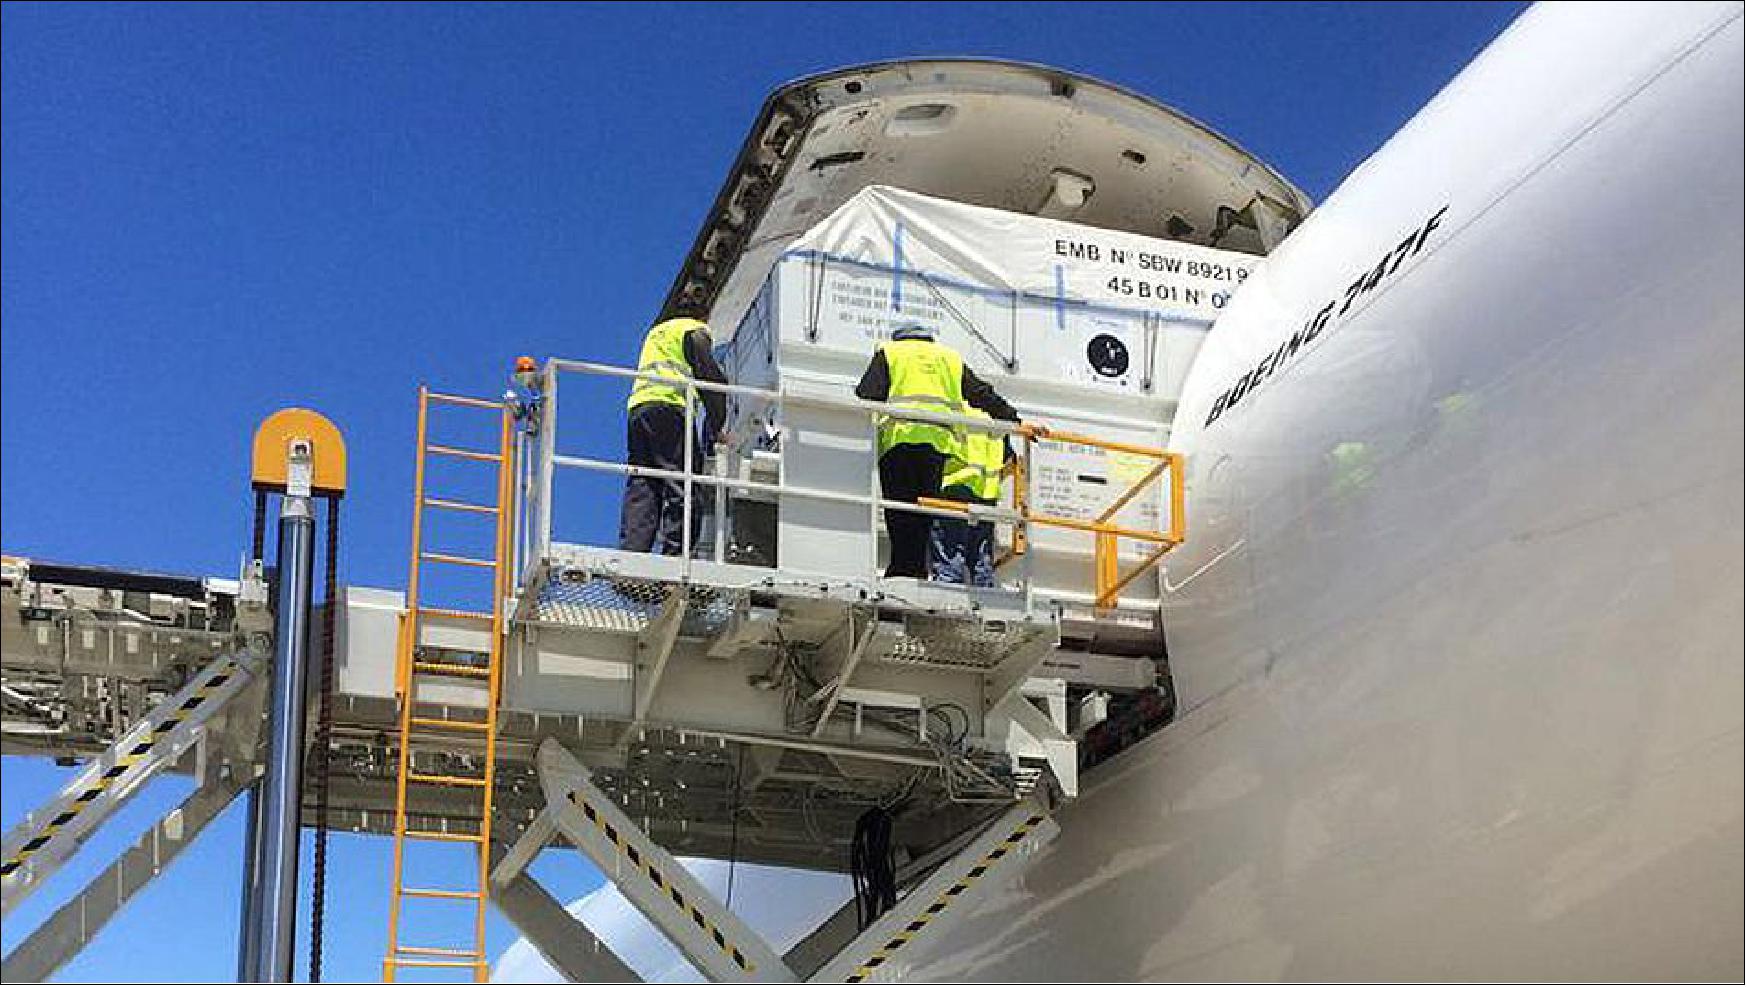 Figure 6: Photo of the Jason-3 spacecraft being unloaded from a 747 transport aircraft at Vandenberg Air Force Base, California, on June 18, 2015, concluding a journey from the Thales Alenia Space manufacturing facility in France (image credit: NASA/JPL) 14)